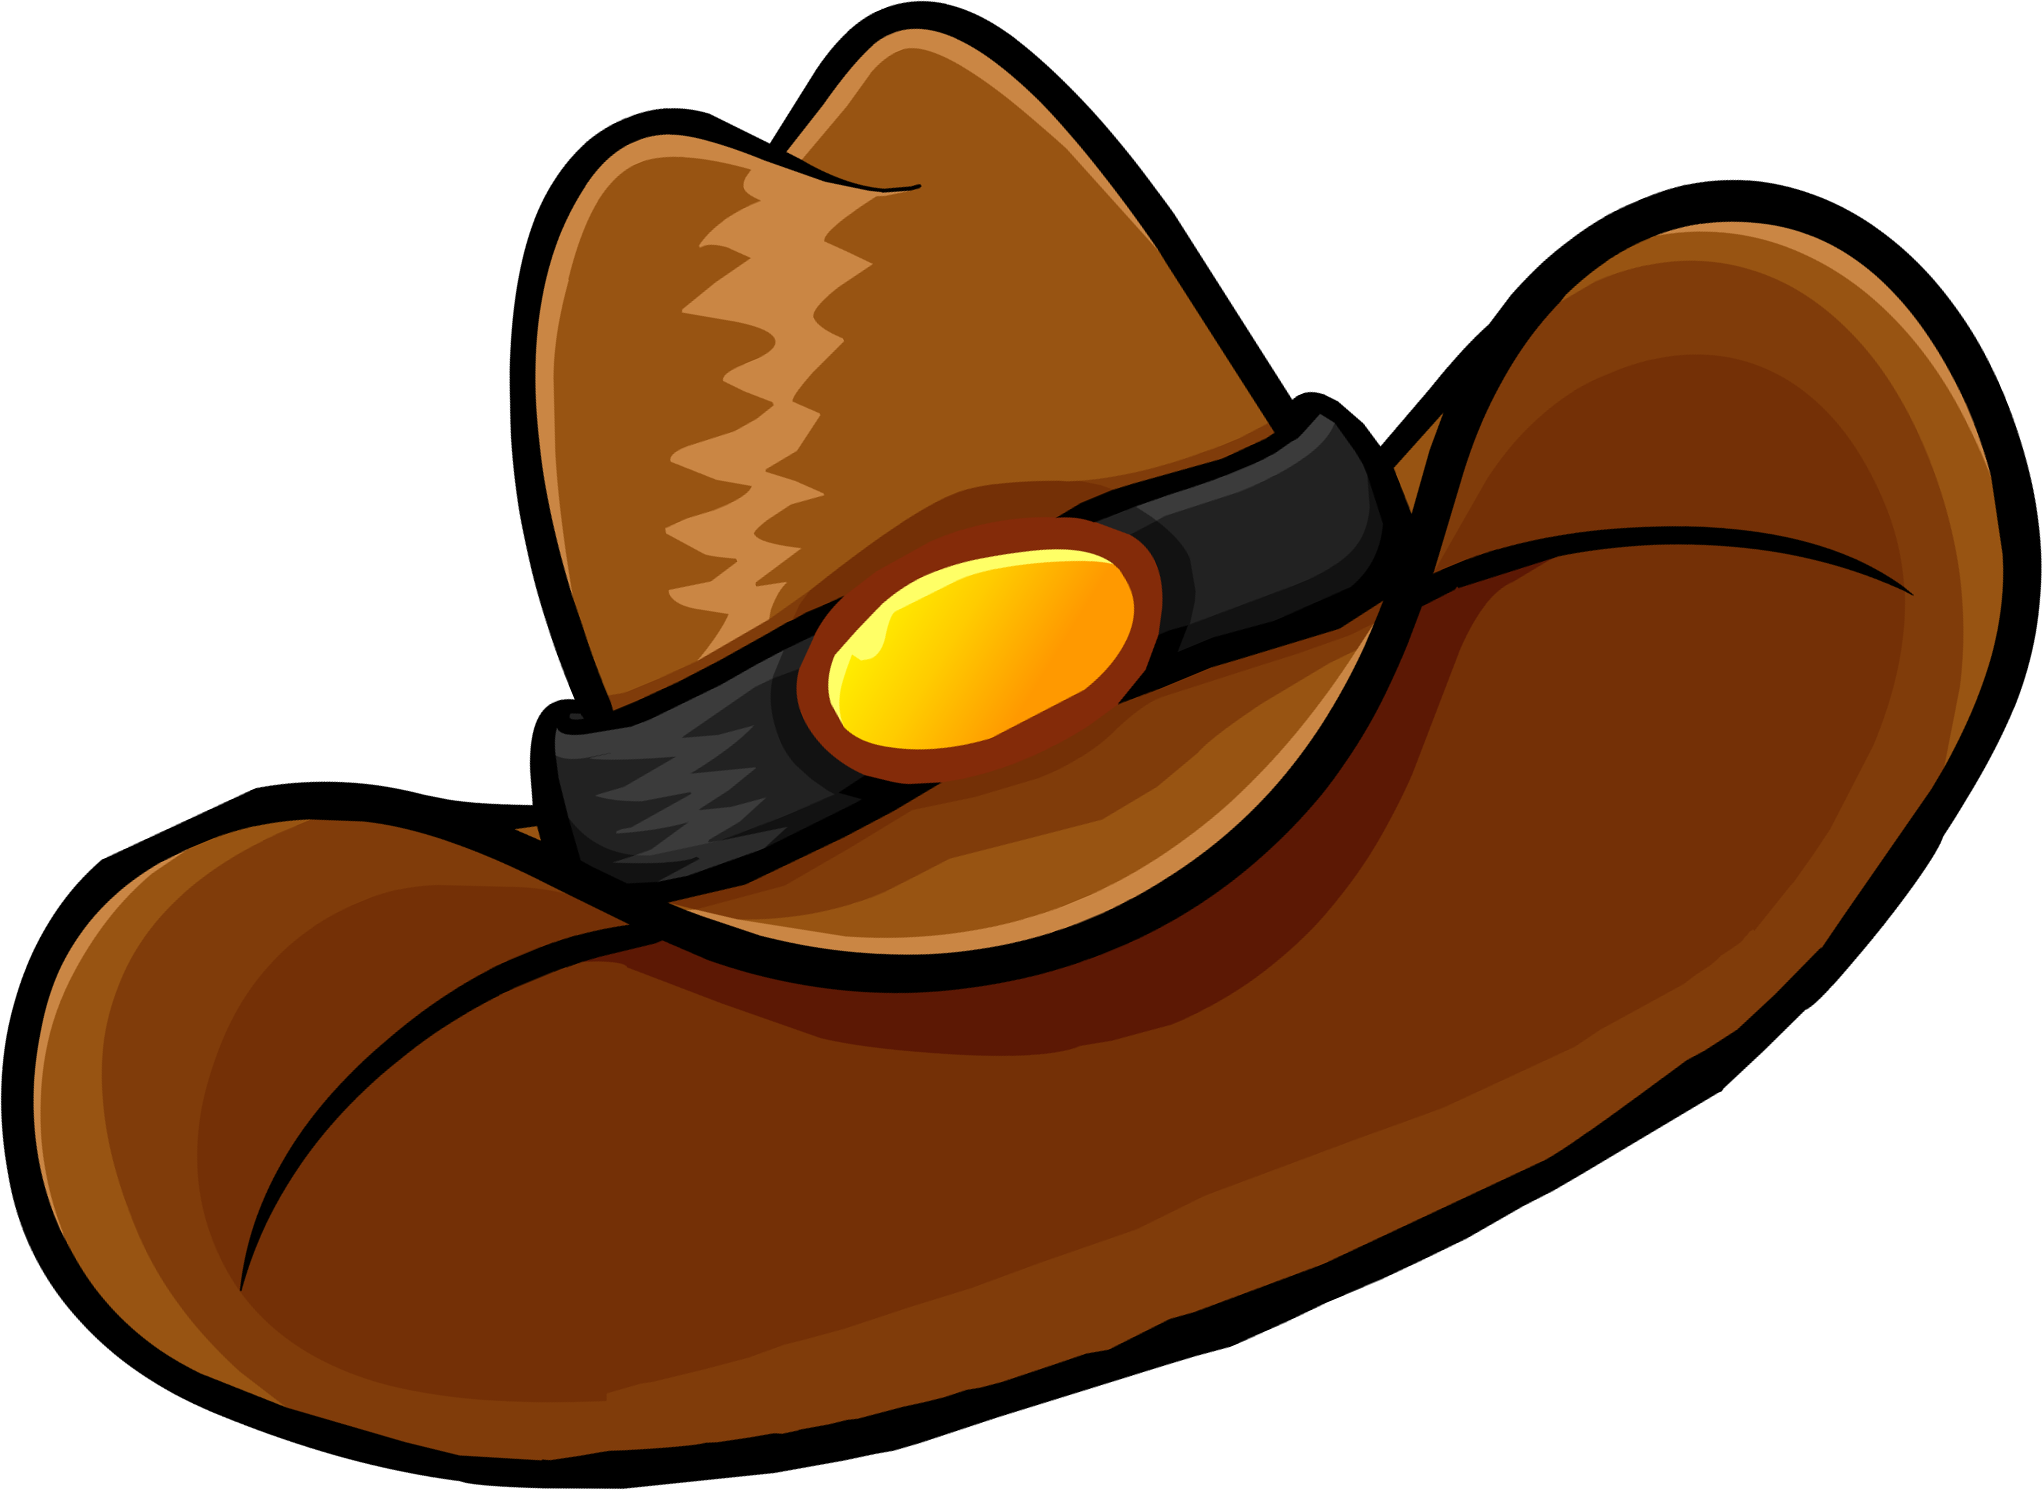 cowgirl hat clipart - photo #49